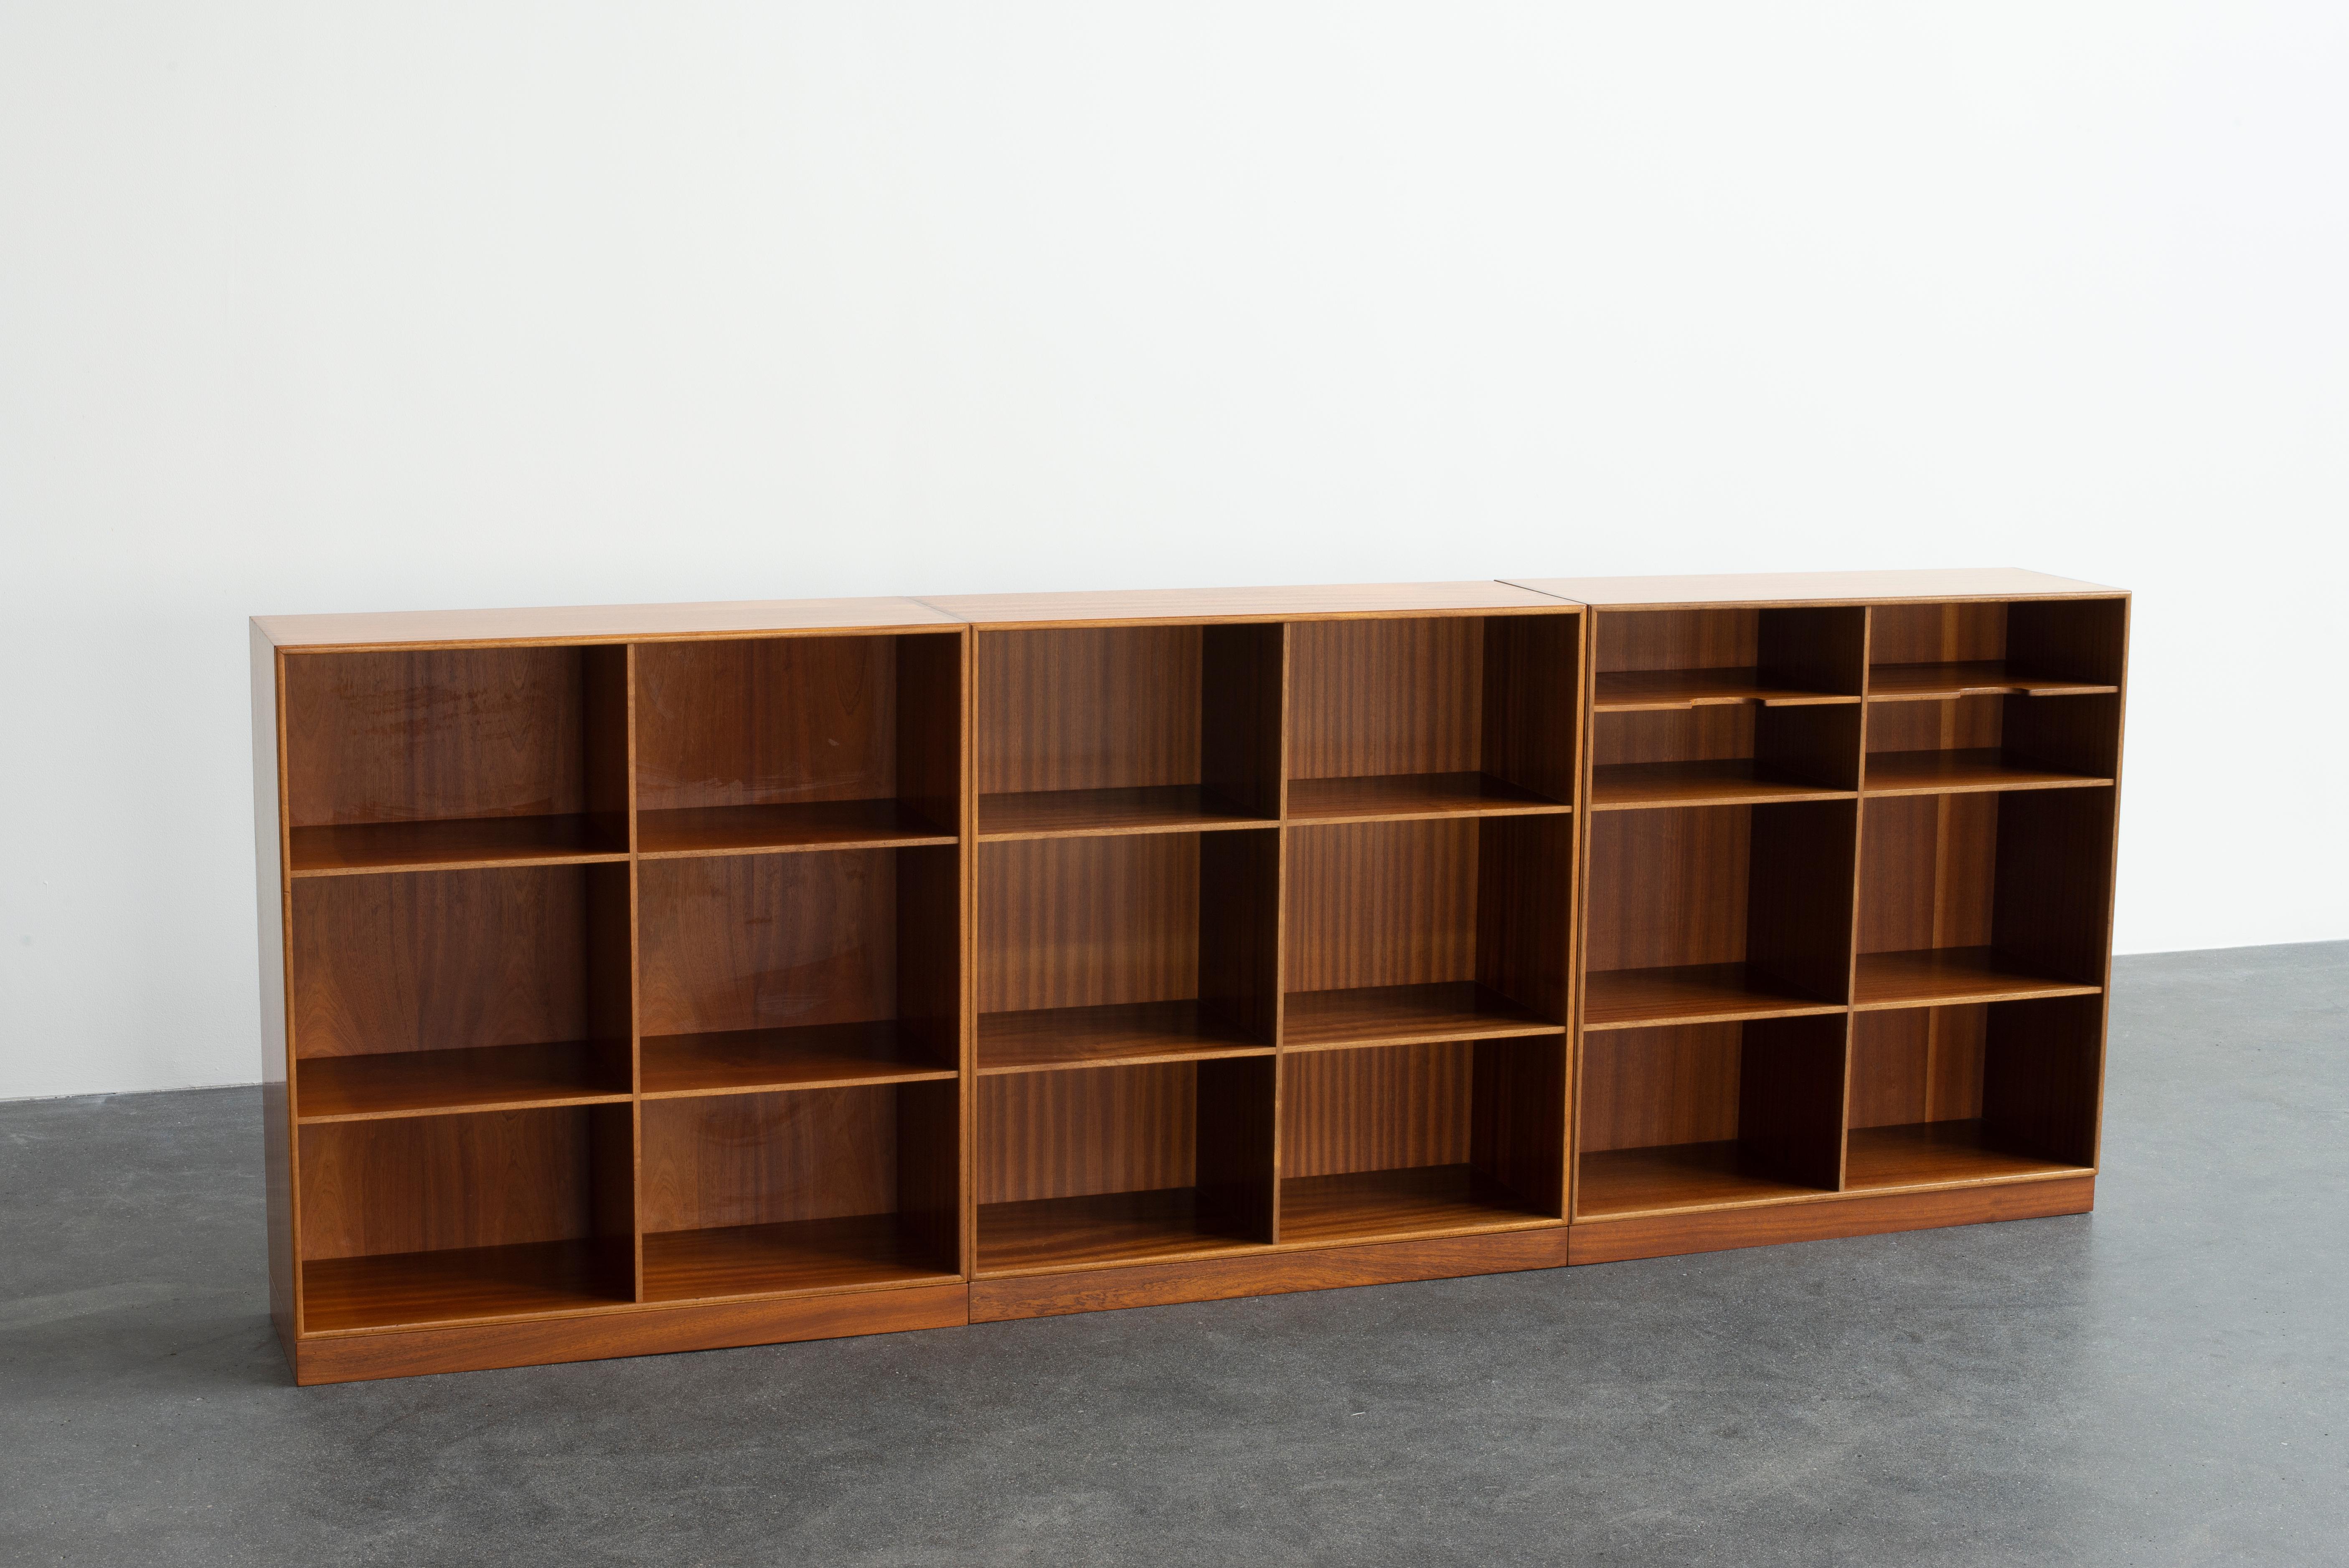 Mogens Koch three bookcases in mahogany + plinths. Executed by Rud. Rasmussen.

The reverse with paper labels ‘RUD. RASMUSSENS/SNEDKERIER/COPENHAGEN/DENMARK.

